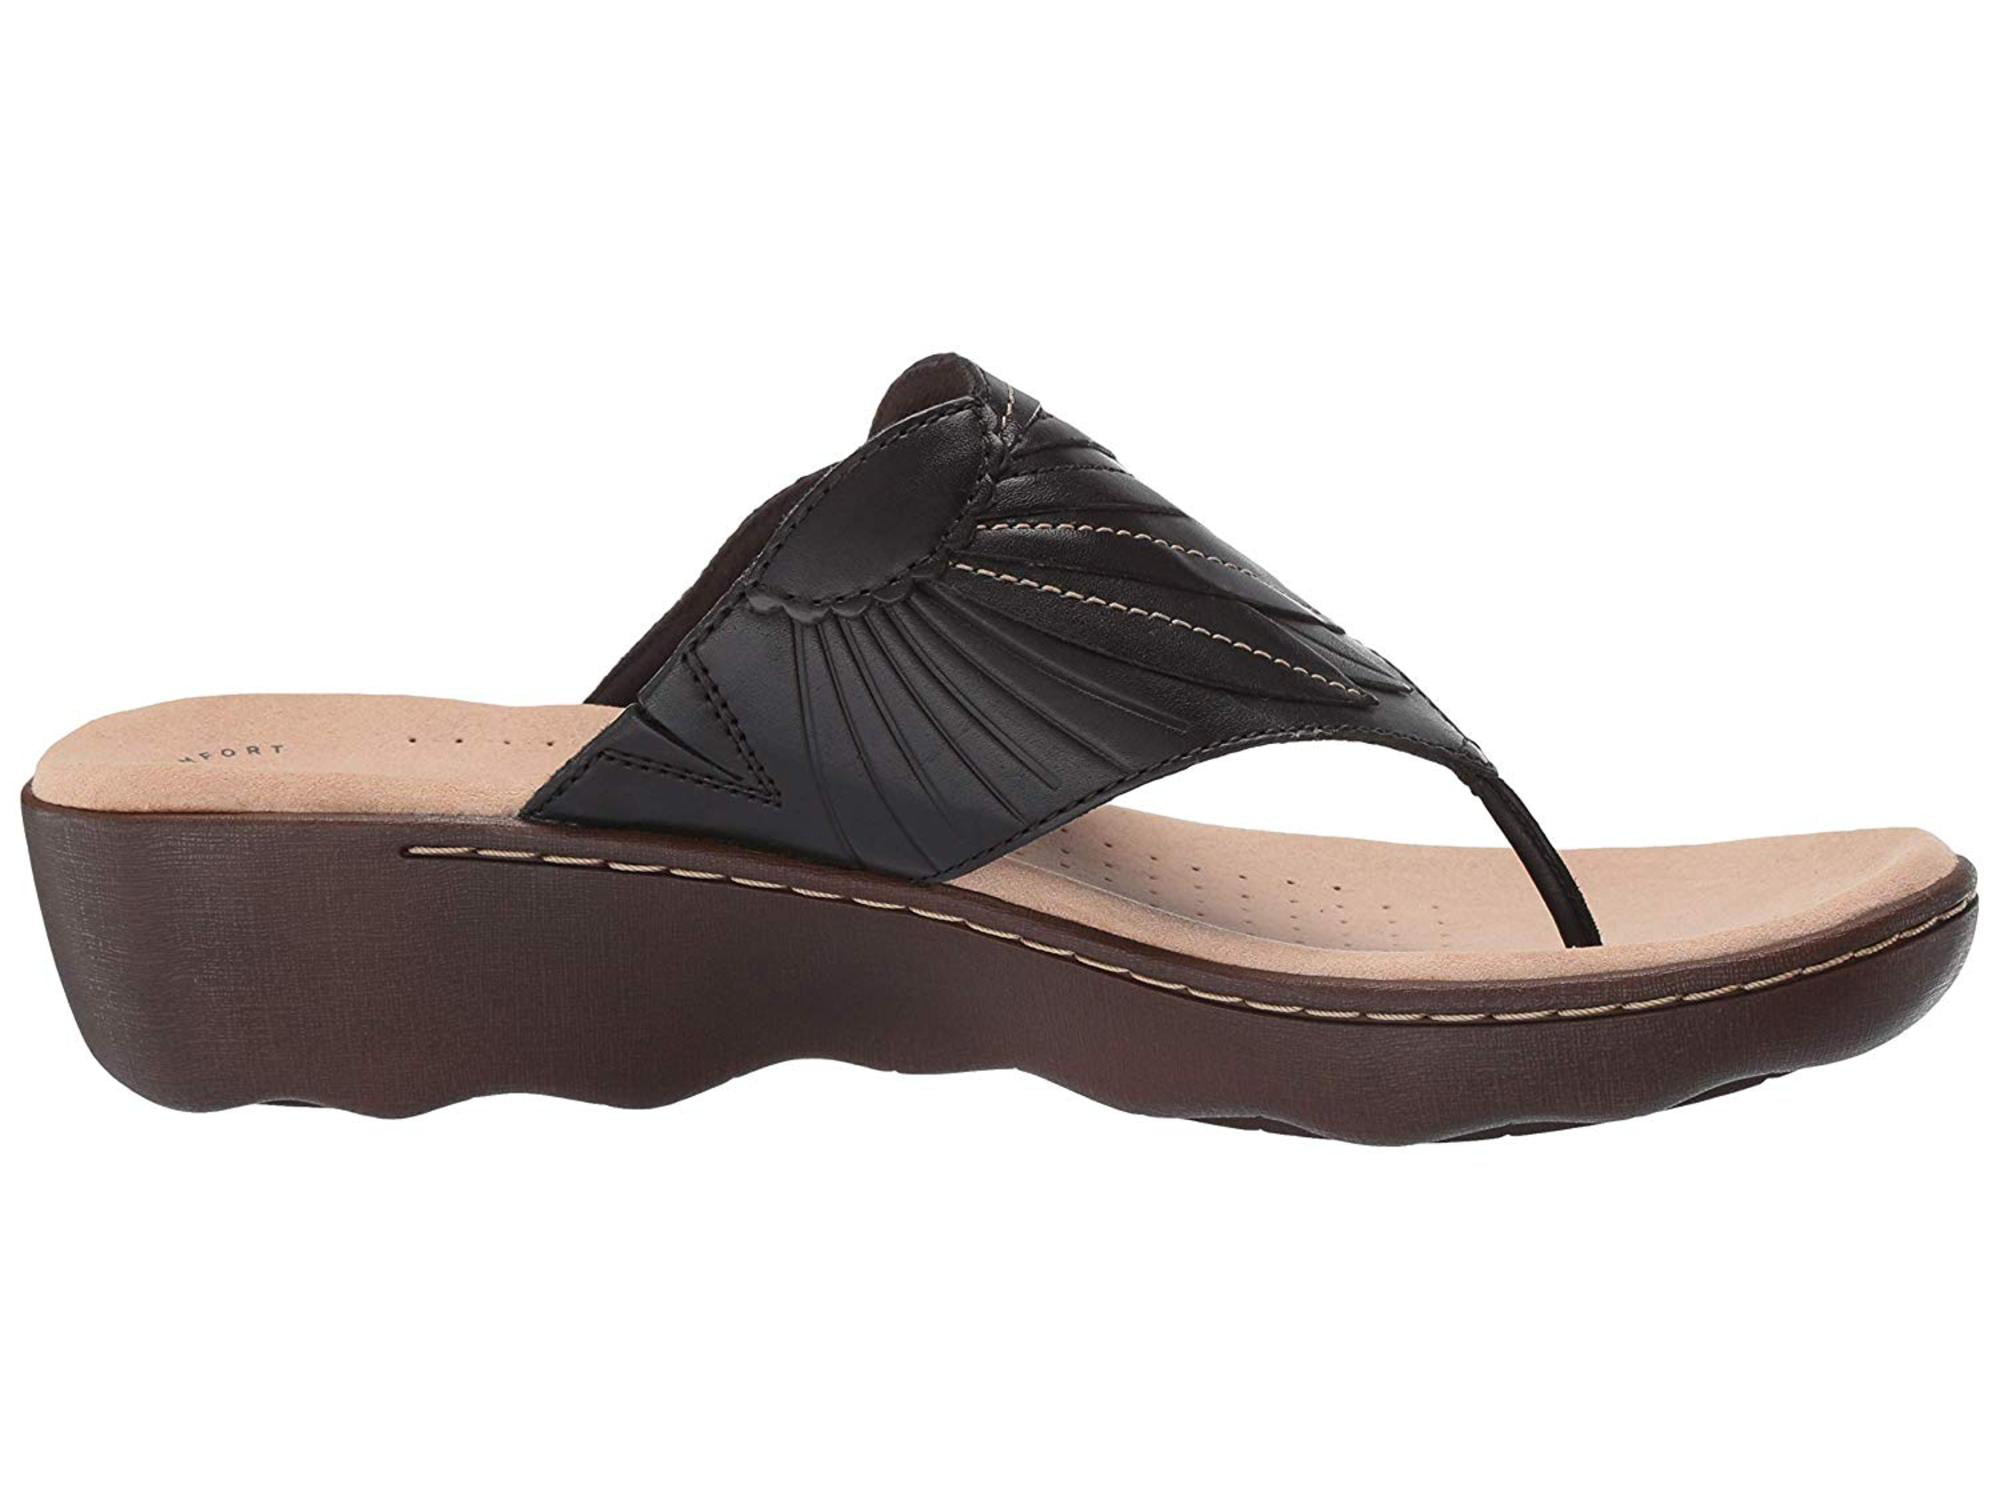 CLARKS Women's, Phebe Pearl Thong Sandals., Black Leather, Size 11.0 ...